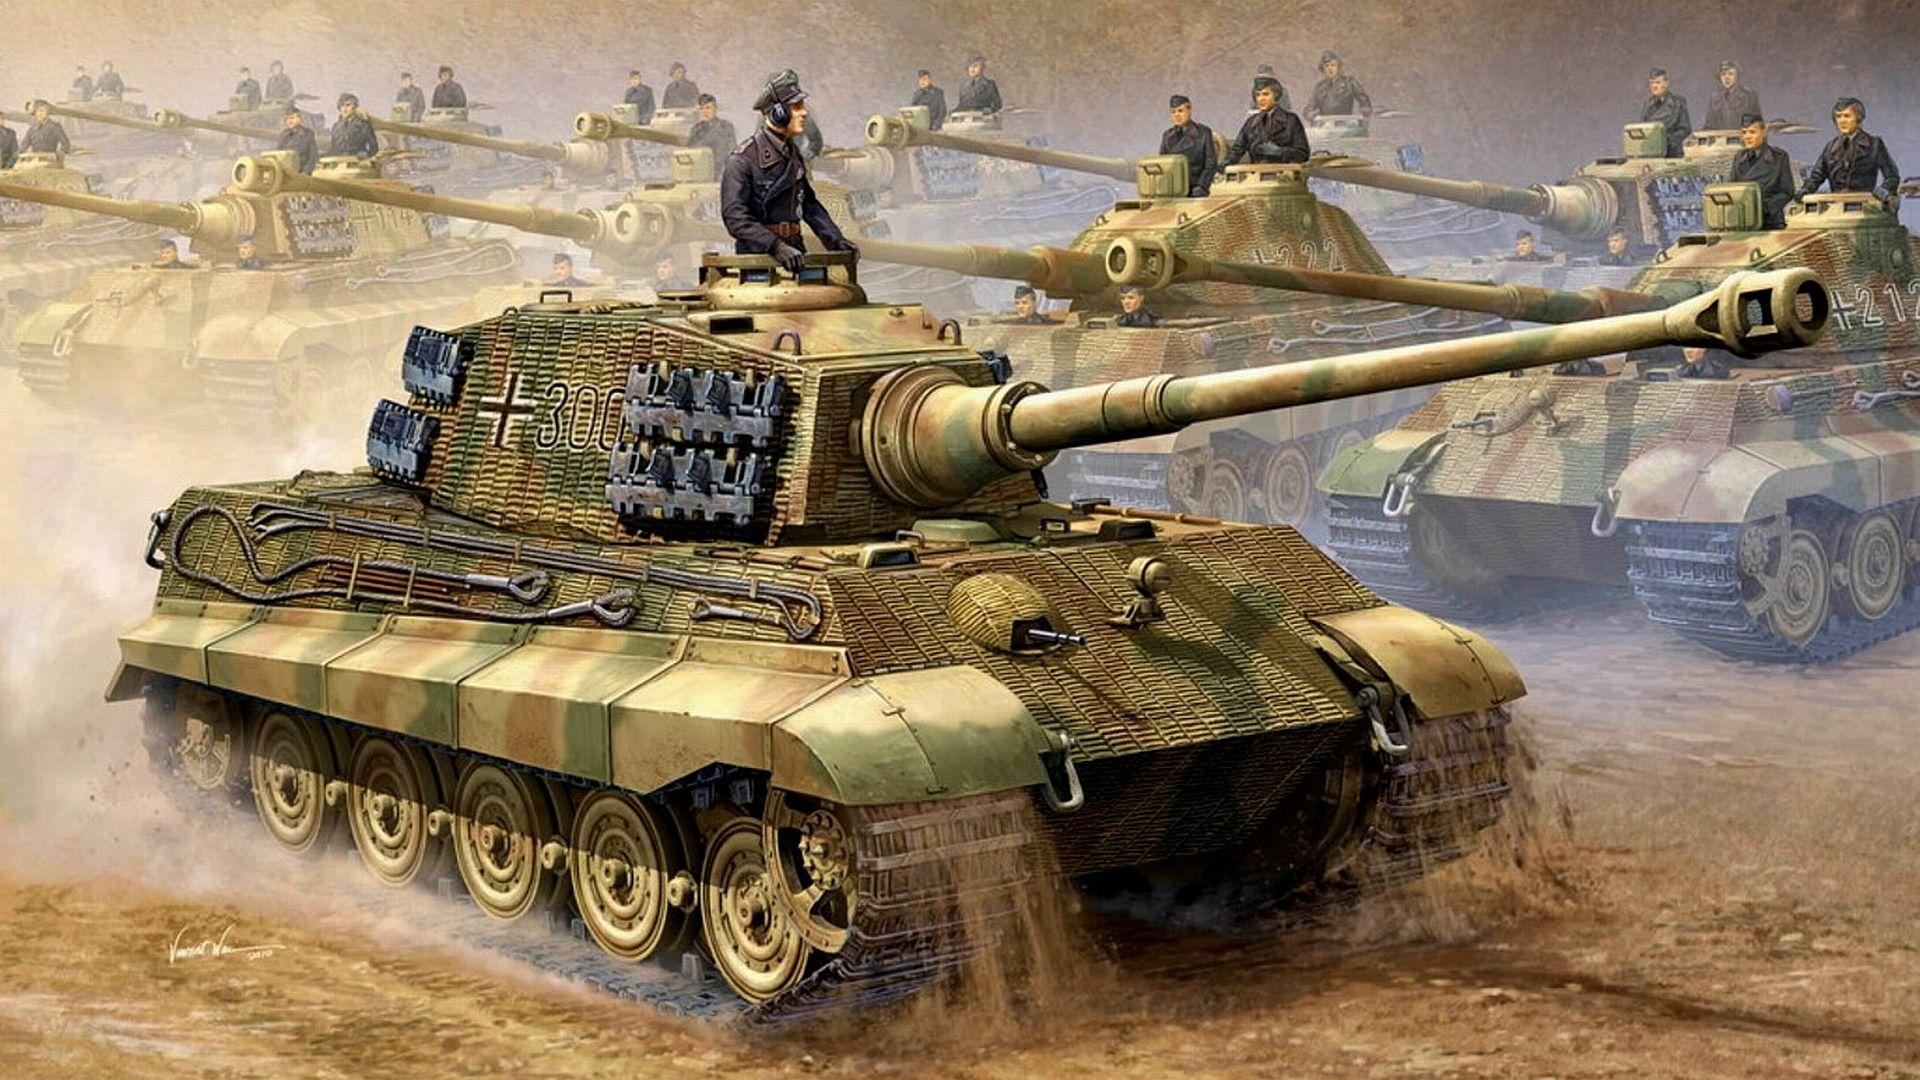 Tank hd wallpapers high quality for desktop